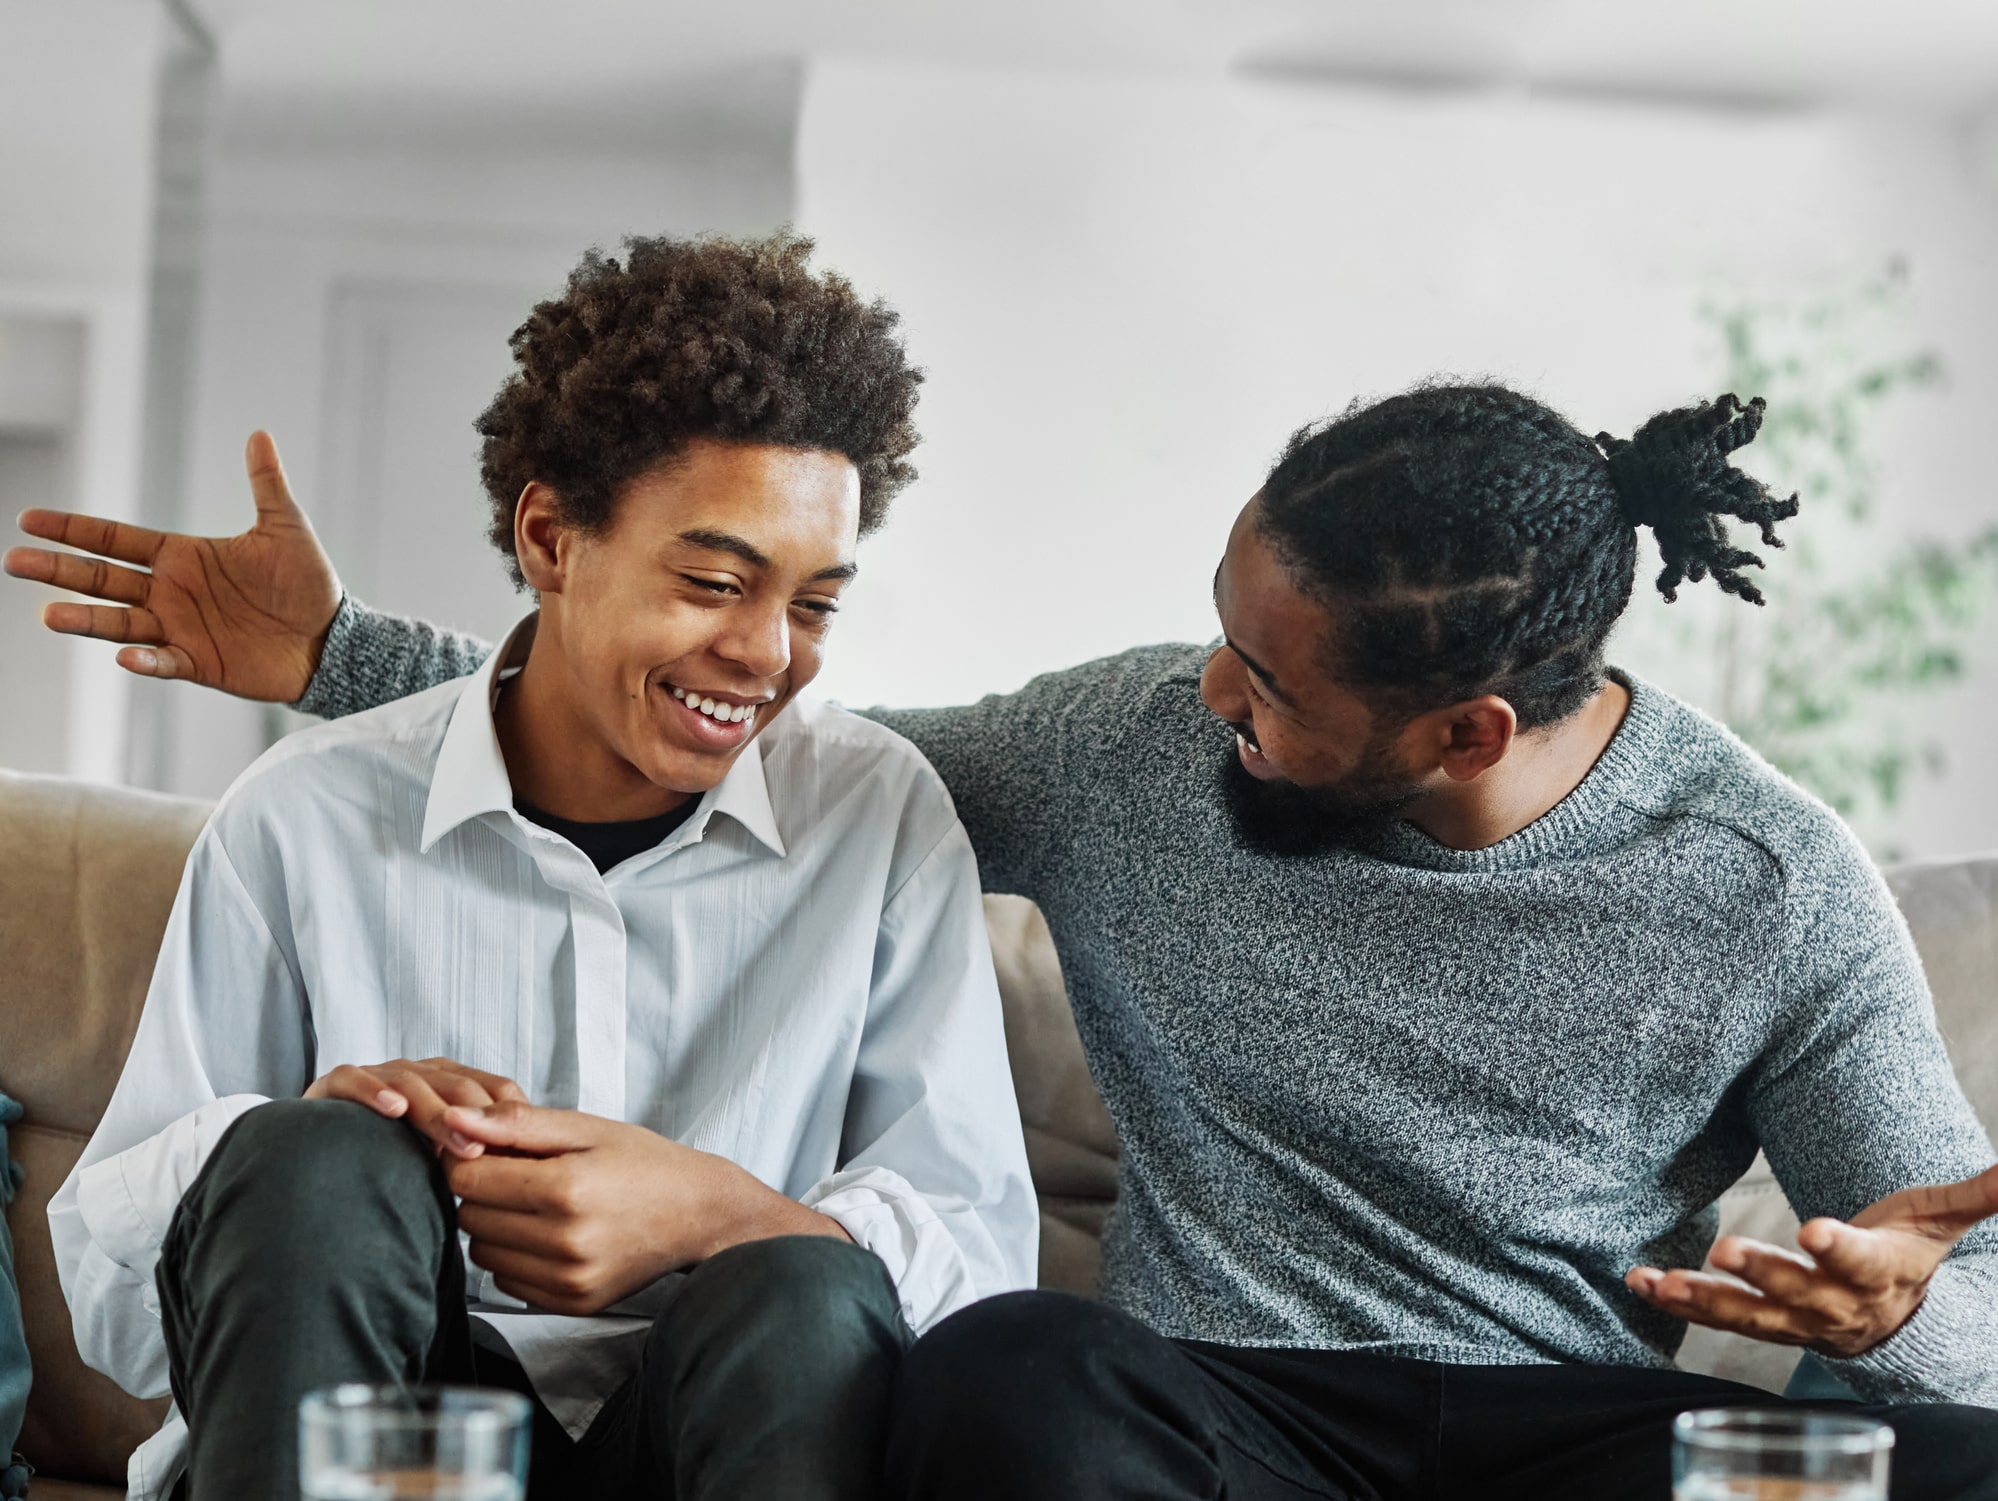 Two black males, one youth and one adult, sitting closely on a couch, engaged in a joyful conversation.